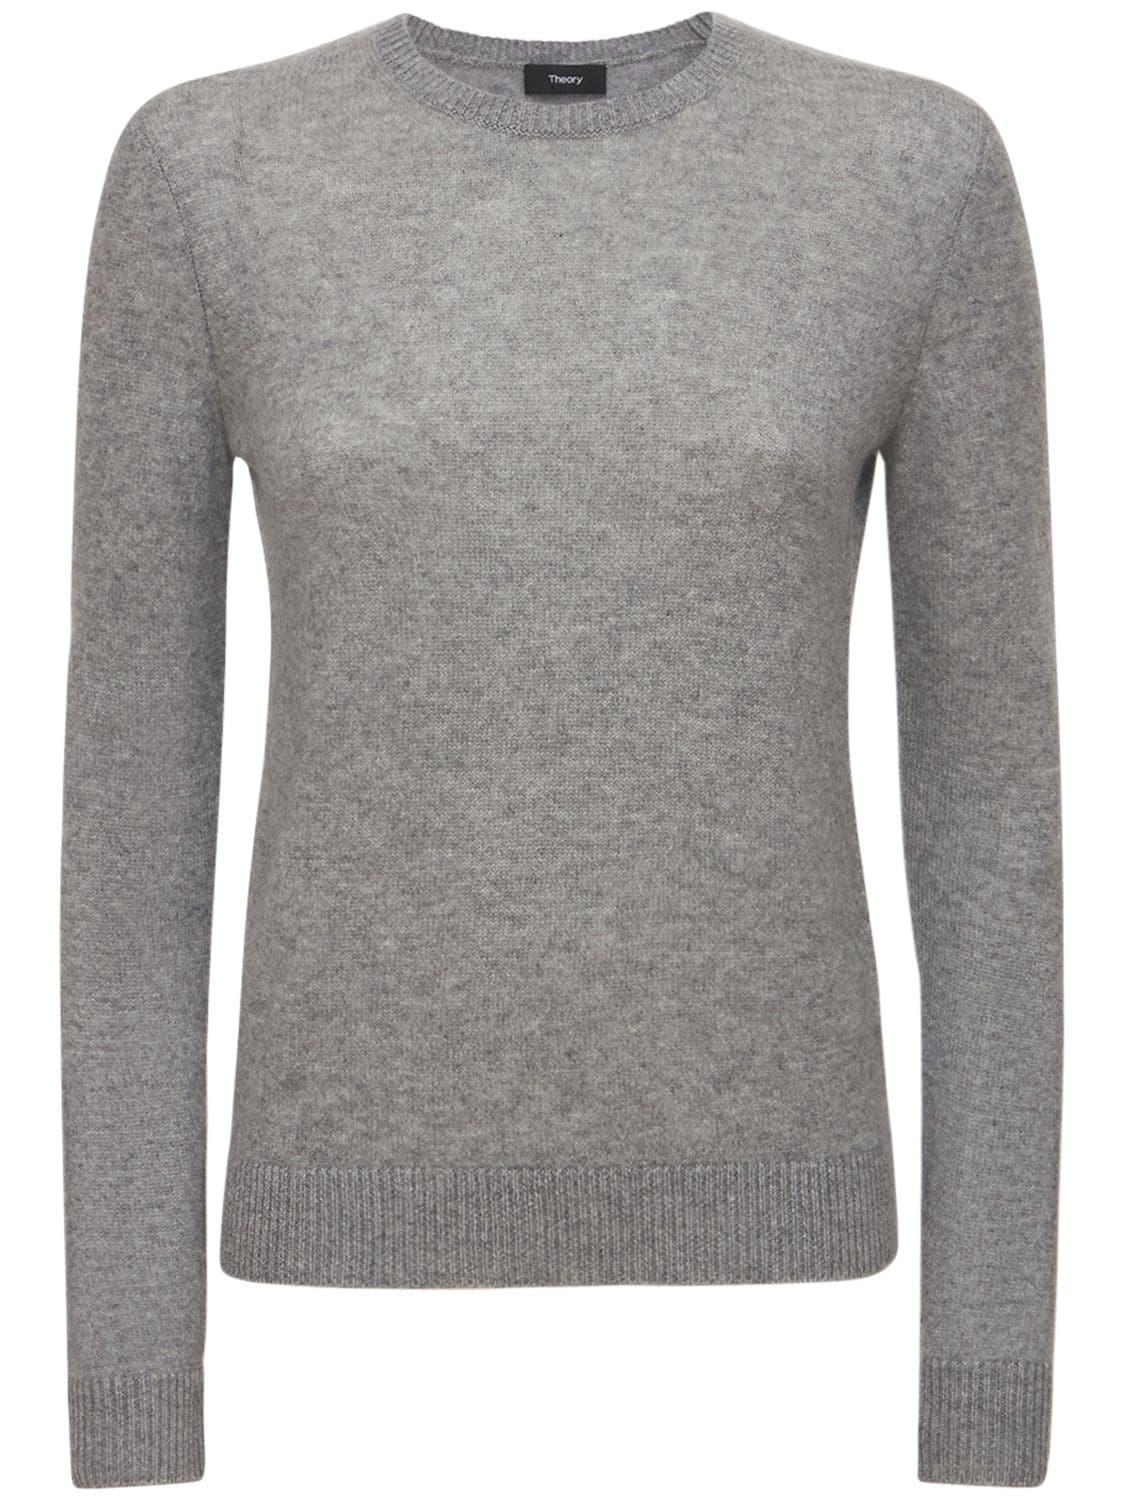 THEORY CREWNECK CASHMERE KNIT SWEATER,74I4S6024-UEDN0